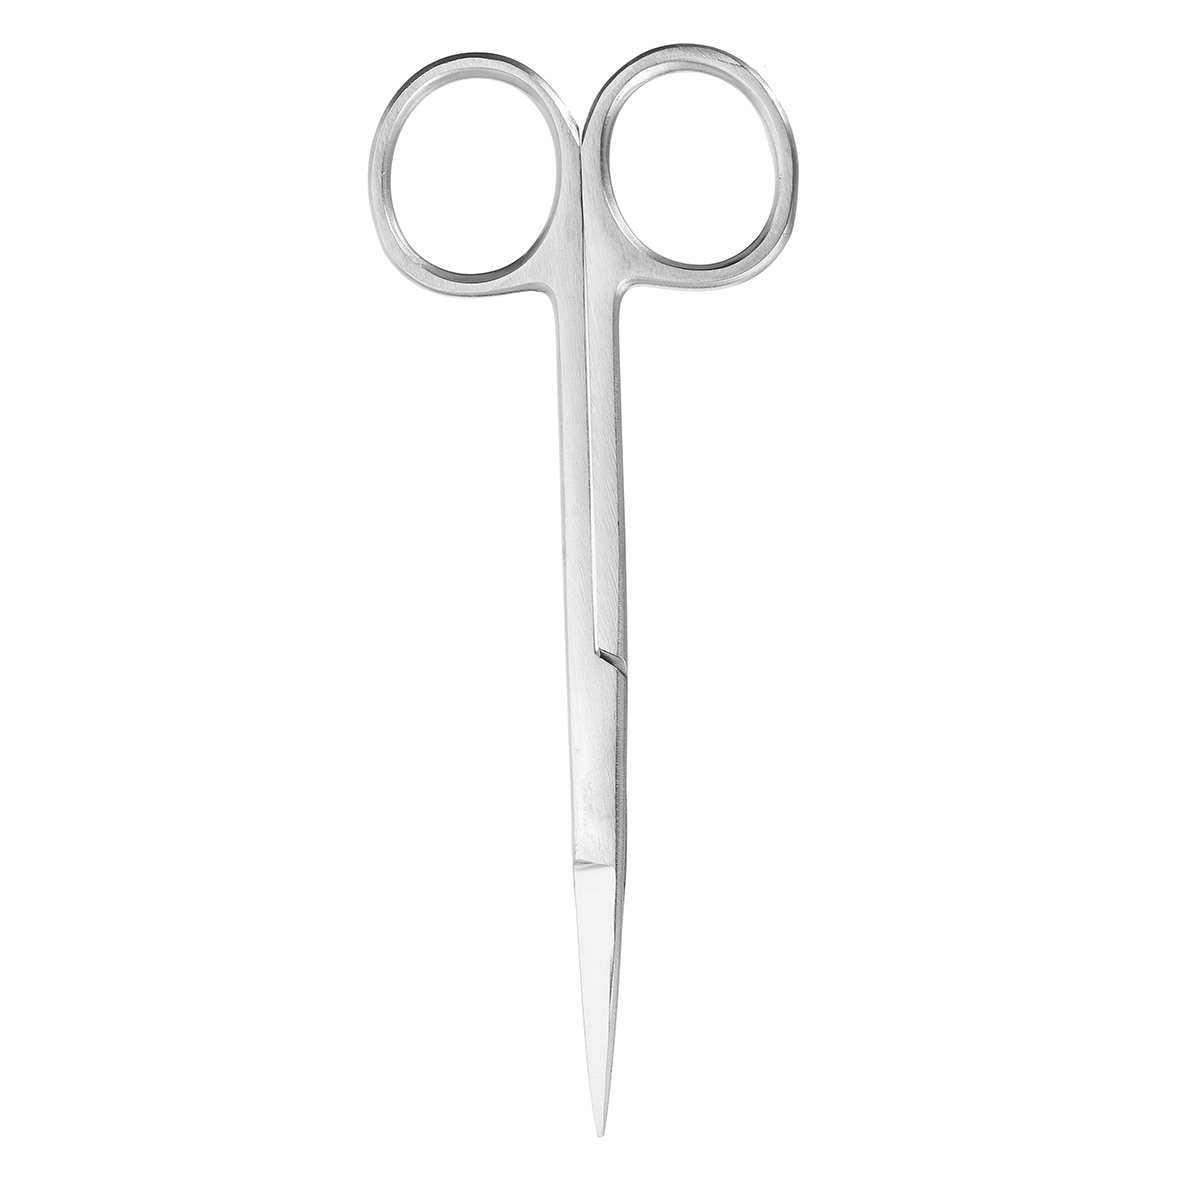 Stainless-Steel-Hemostatic-Artery-Locking-Clamp-Surgical-Forceps-Tweezers-with-Blade-Tools-Kit-1416398